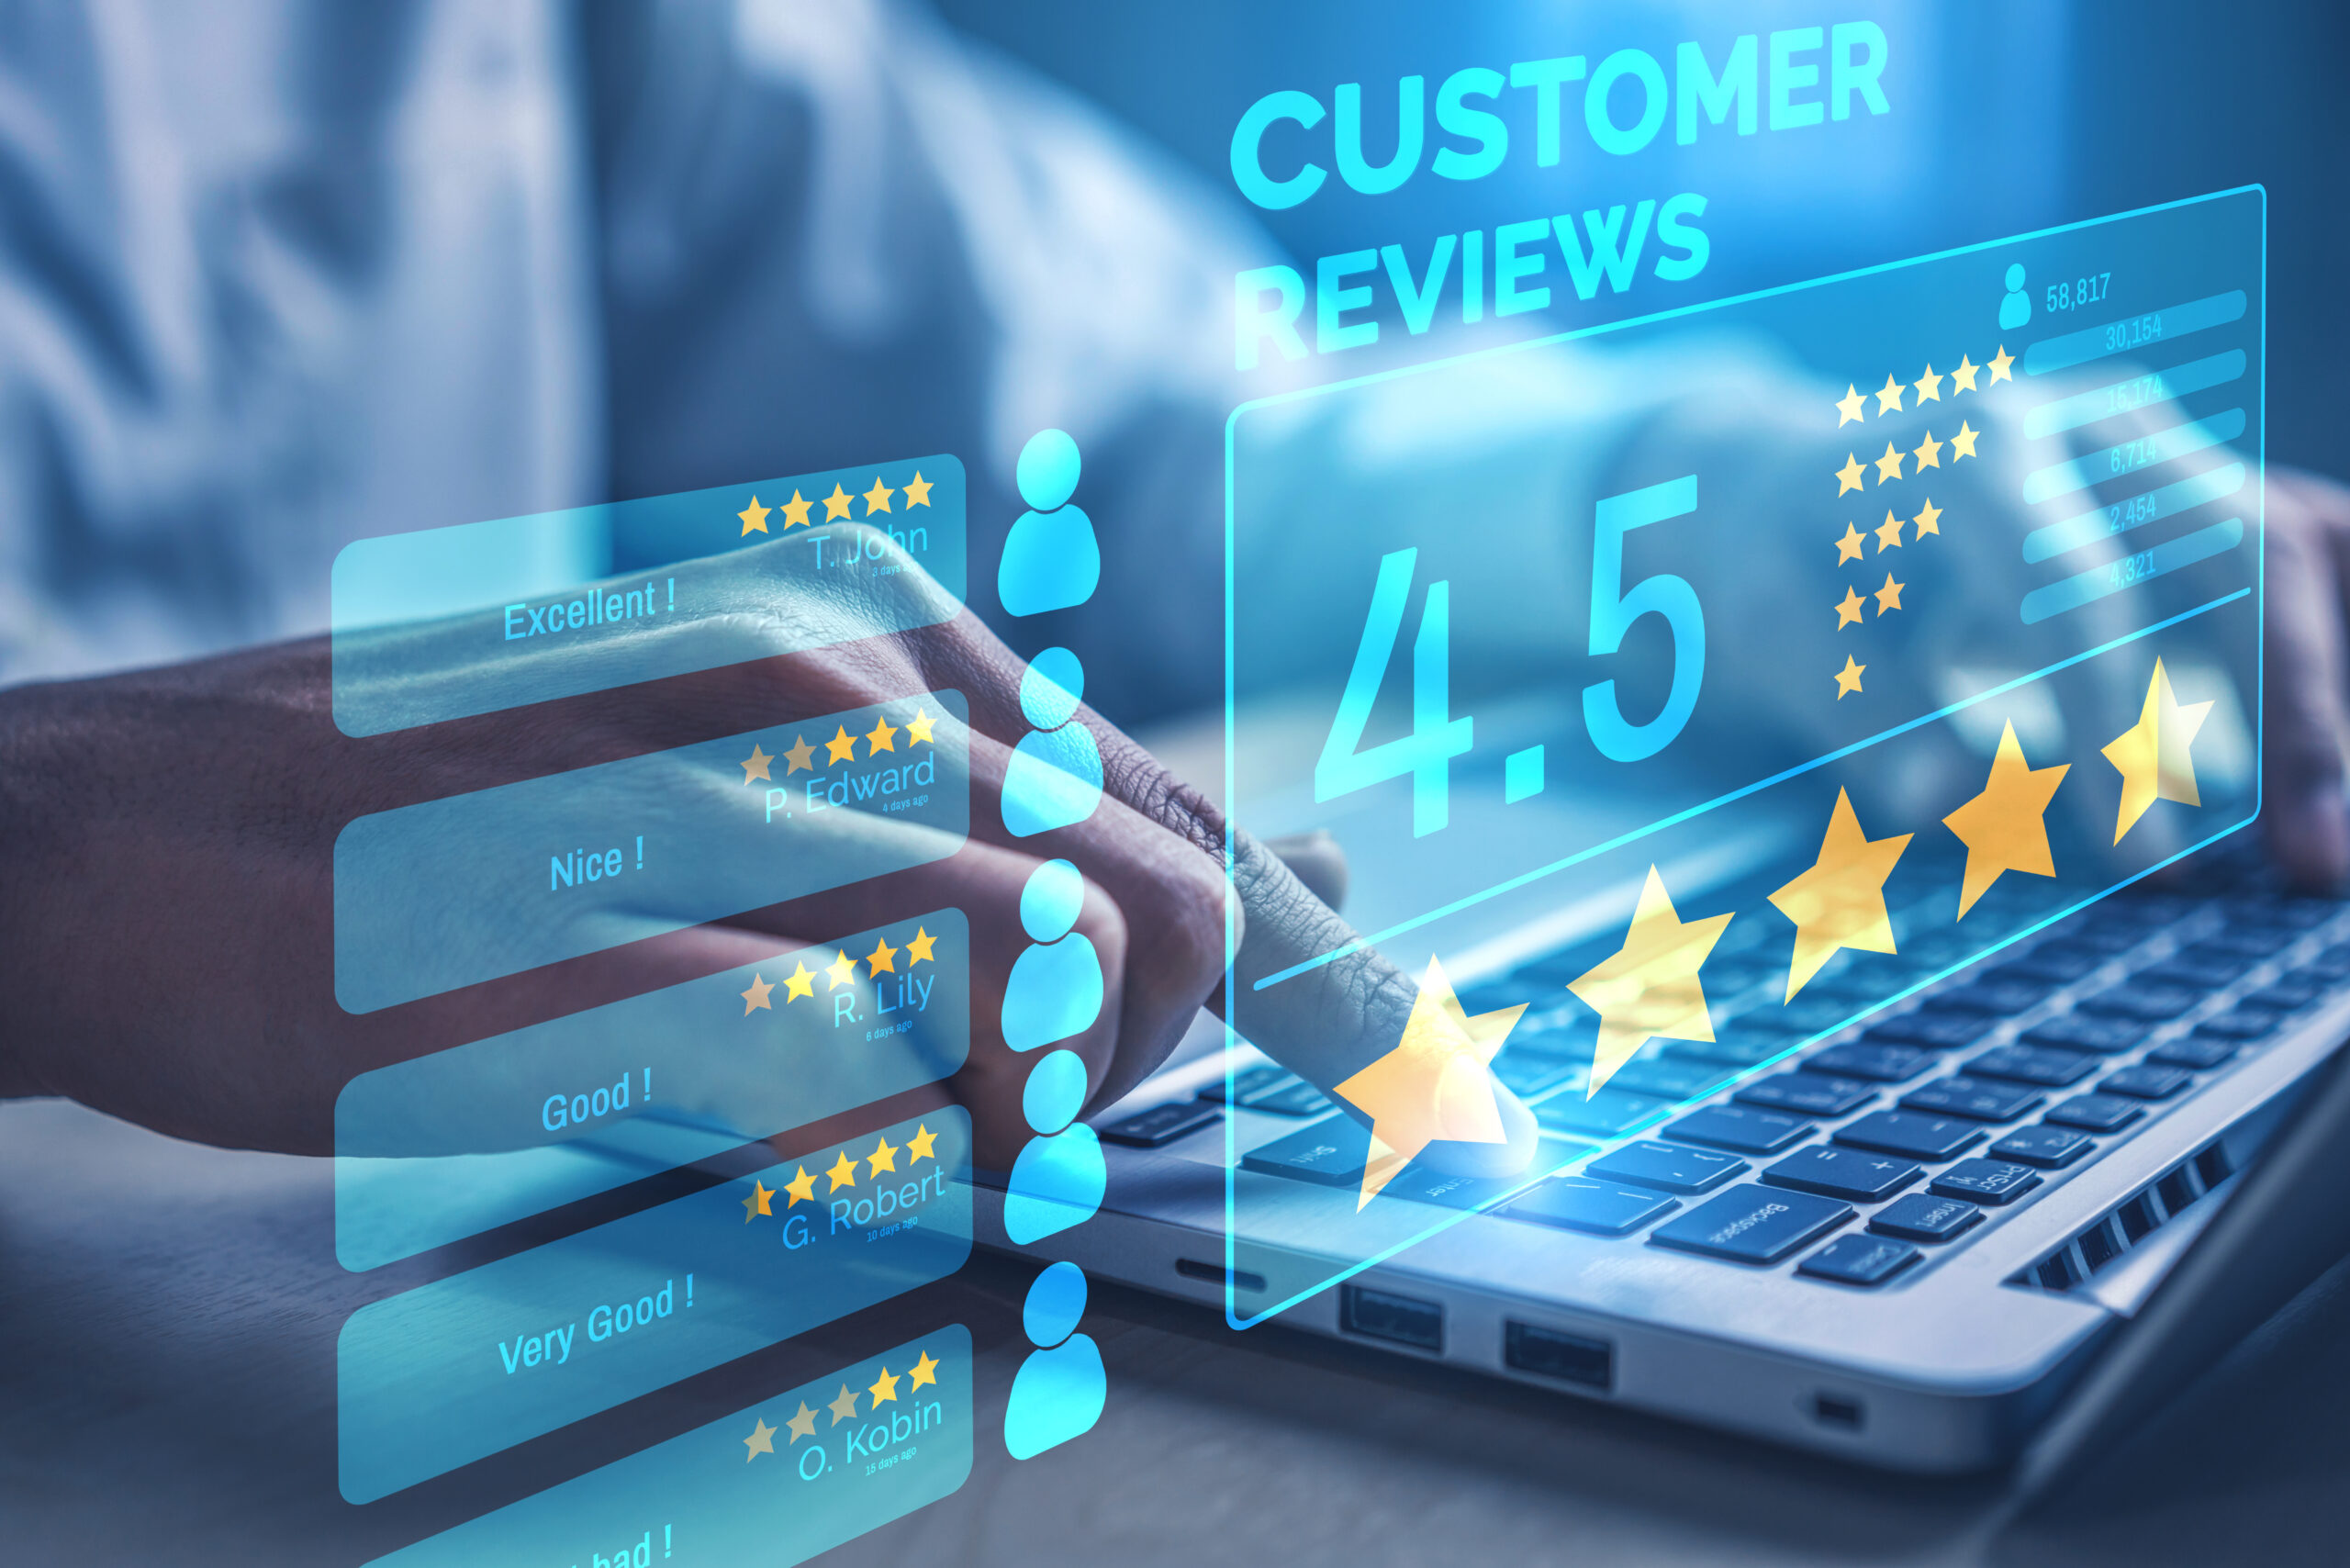 Who should you monitor your customers’ online reviews?